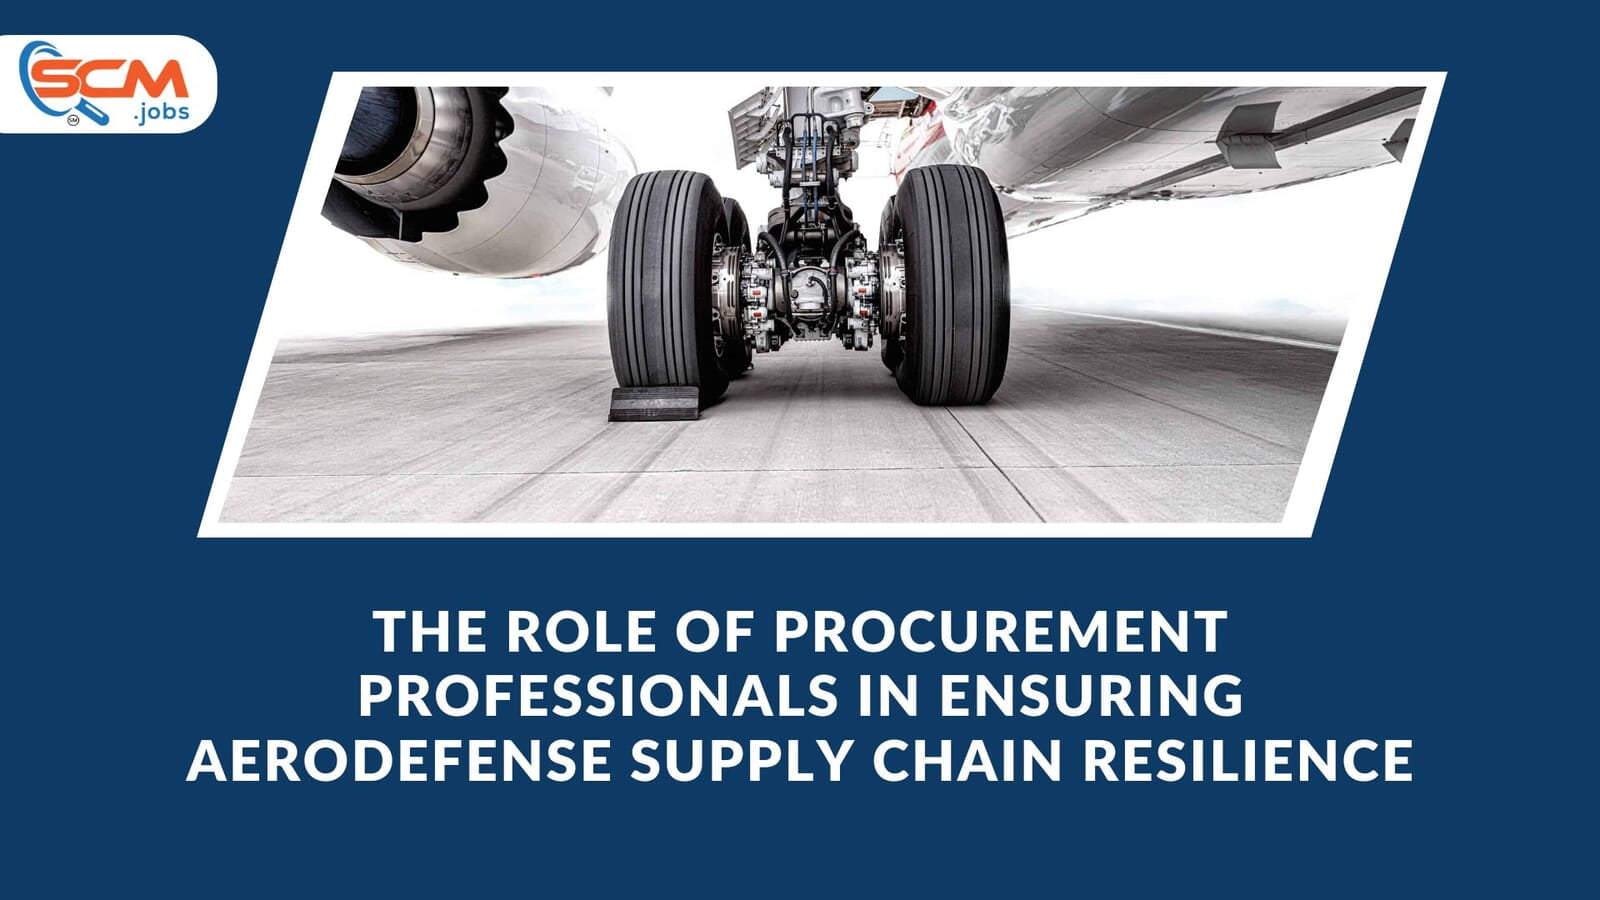 The Role of Procurement Professionals in Ensuring Aerodefense Supply Chain Resilience